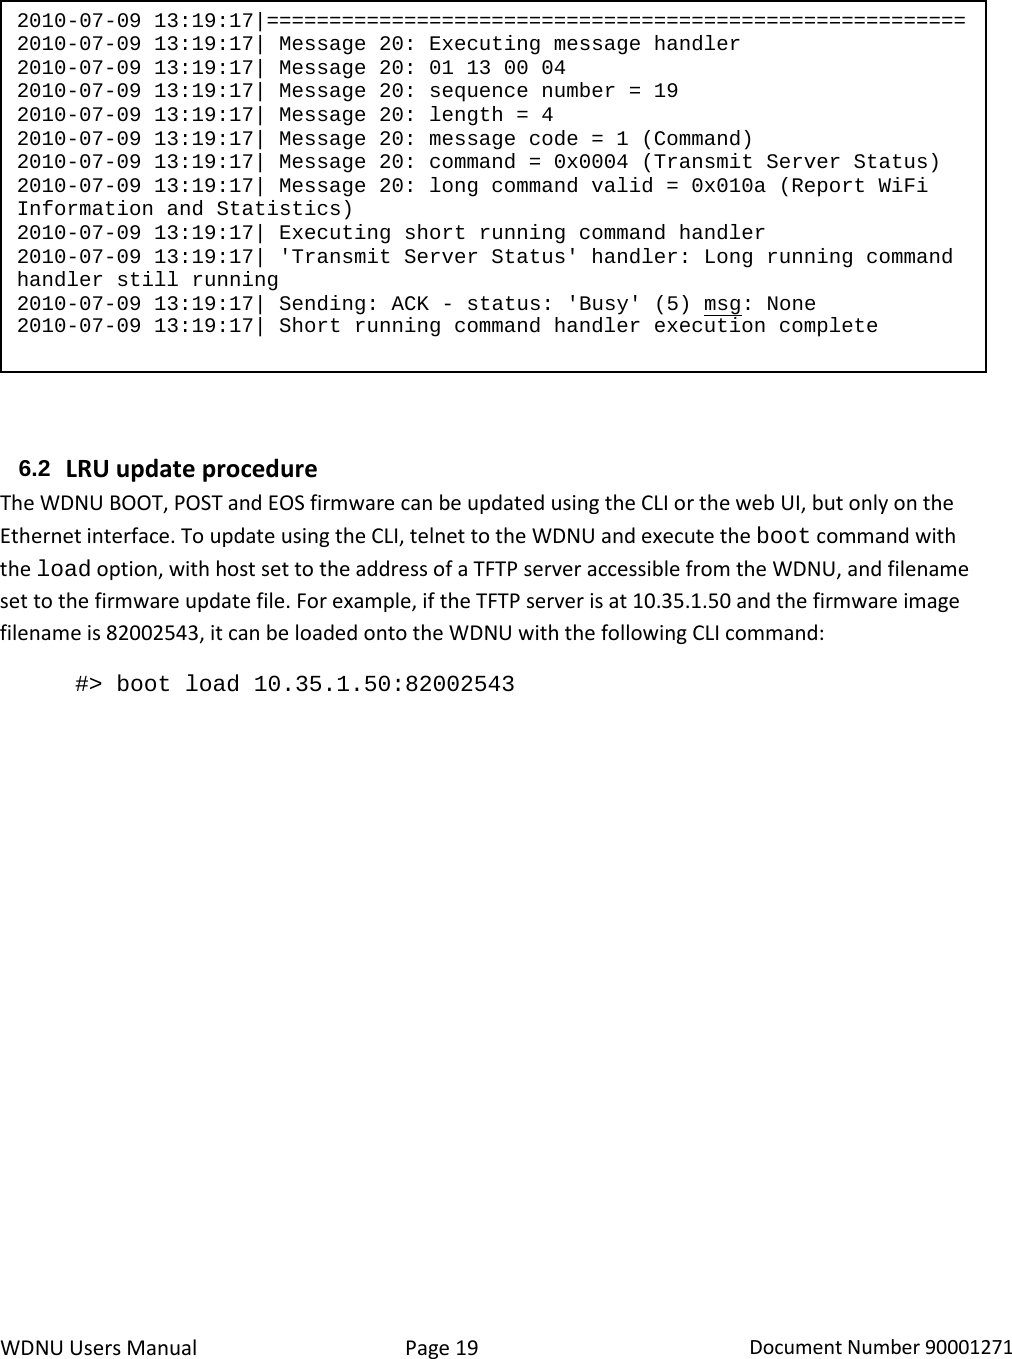 WDNU Users Manual Page 19 Document Number 90001271    6.2 LRU update procedure The WDNU BOOT, POST and EOS firmware can be updated using the CLI or the web UI, but only on the Ethernet interface. To update using the CLI, telnet to the WDNU and execute the boot command with the load option, with host set to the address of a TFTP server accessible from the WDNU, and filename set to the firmware update file. For example, if the TFTP server is at 10.35.1.50 and the firmware image filename is 82002543, it can be loaded onto the WDNU with the following CLI command:  #&gt; boot load 10.35.1.50:82002543 2010-07-09 13:19:17|======================================================== 2010-07-09 13:19:17| Message 20: Executing message handler 2010-07-09 13:19:17| Message 20: 01 13 00 04 2010-07-09 13:19:17| Message 20: sequence number = 19 2010-07-09 13:19:17| Message 20: length = 4 2010-07-09 13:19:17| Message 20: message code = 1 (Command) 2010-07-09 13:19:17| Message 20: command = 0x0004 (Transmit Server Status) 2010-07-09 13:19:17| Message 20: long command valid = 0x010a (Report WiFi Information and Statistics) 2010-07-09 13:19:17| Executing short running command handler 2010-07-09 13:19:17| &apos;Transmit Server Status&apos; handler: Long running command handler still running 2010-07-09 13:19:17| Sending: ACK - status: &apos;Busy&apos; (5) msg: None 2010-07-09 13:19:17| Short running command handler execution complete 